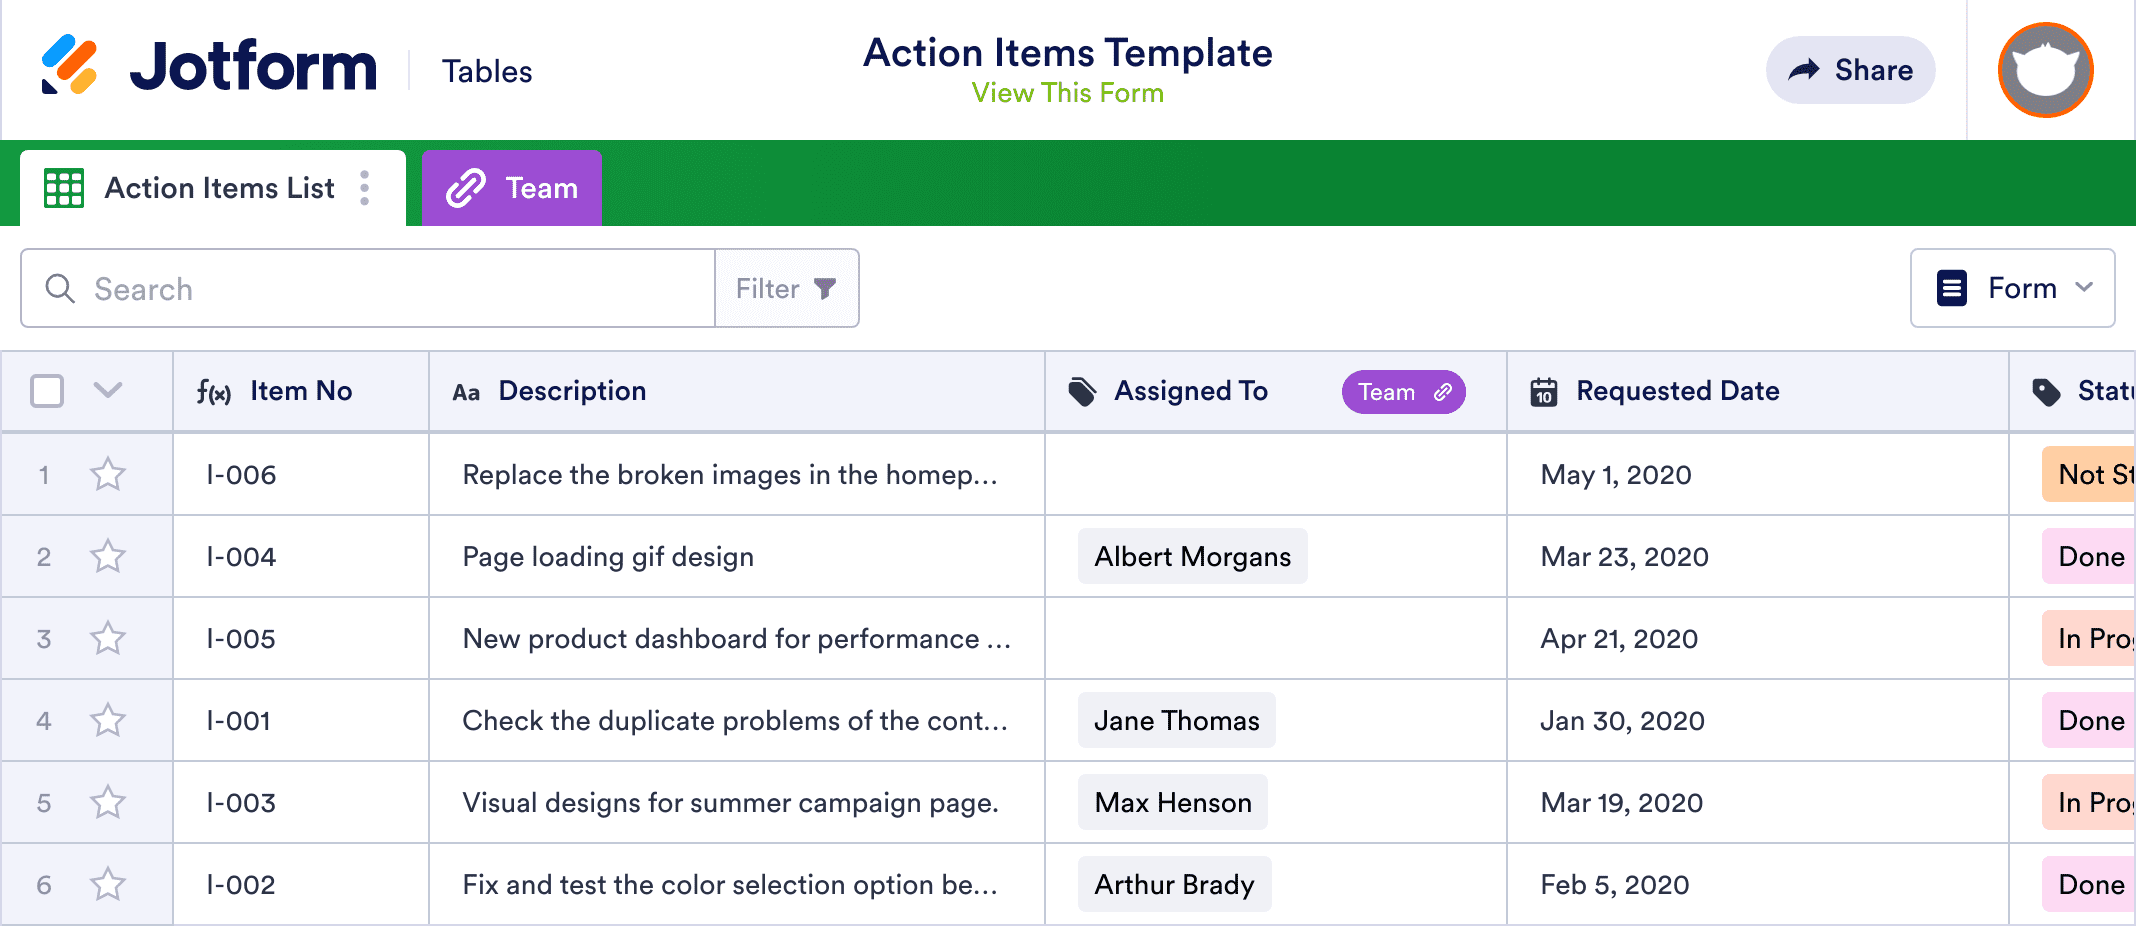 Action Items Template